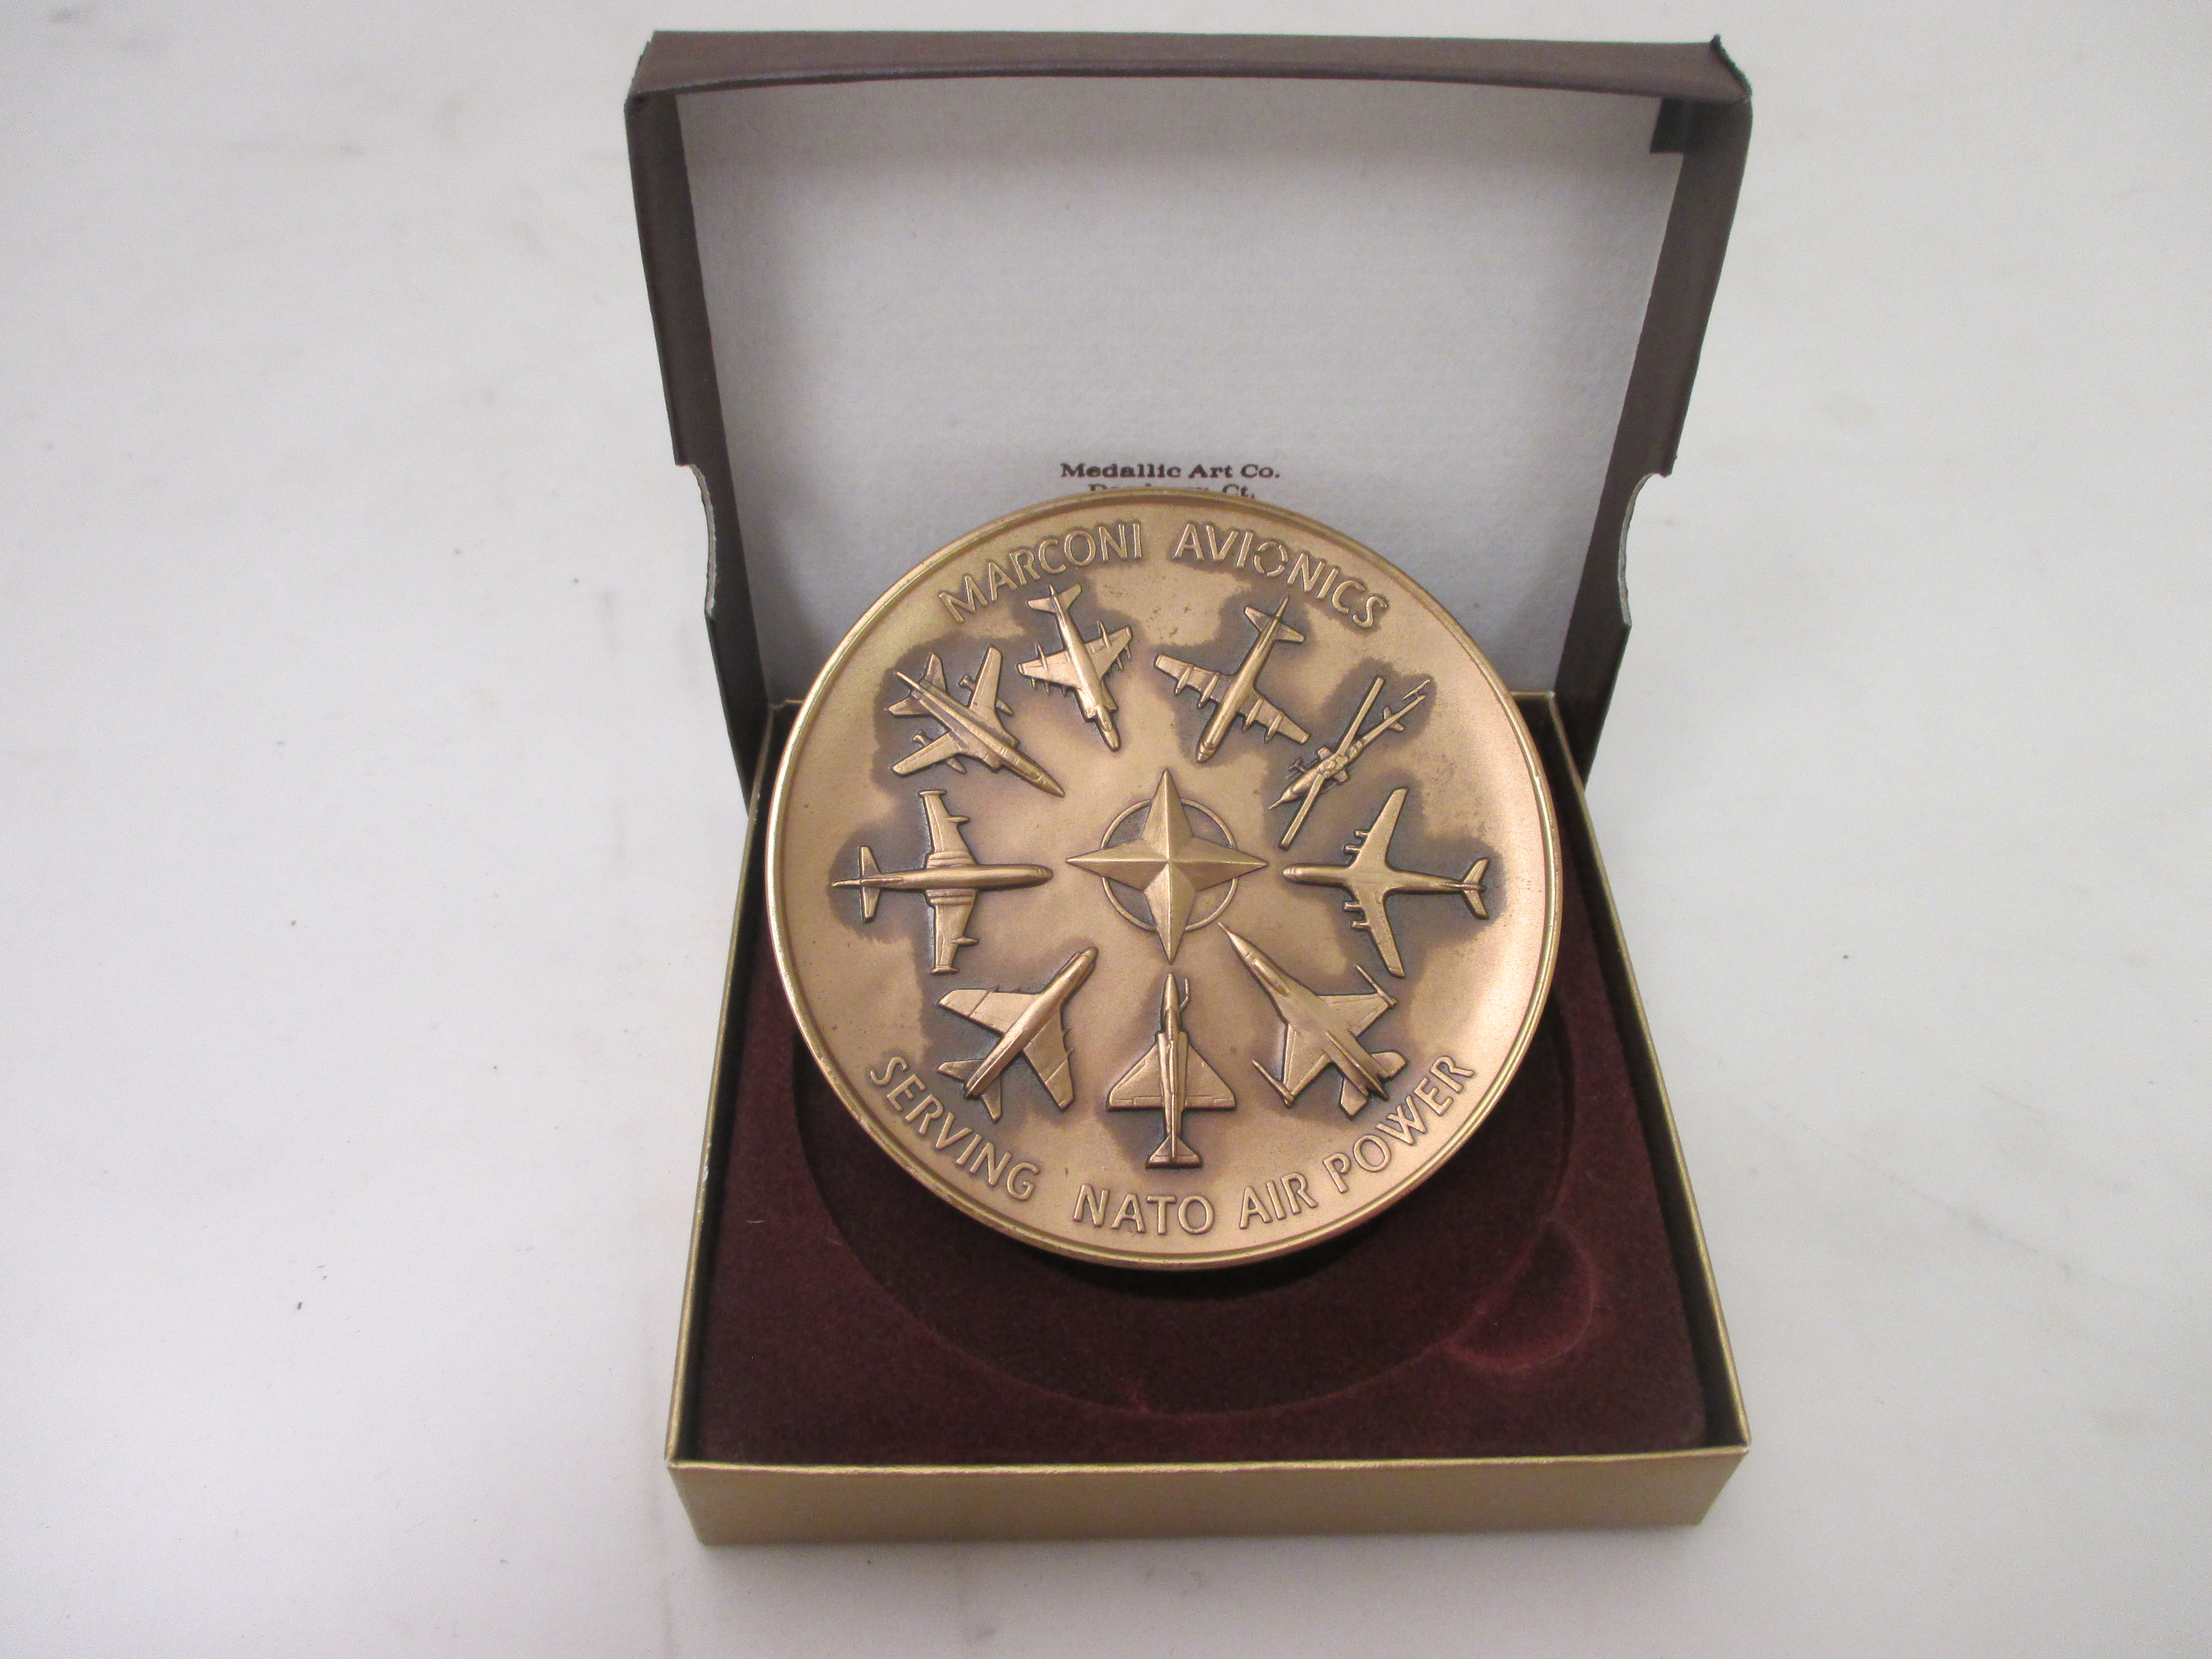 Medallion commemorating the opening of new facility in Atlanta.